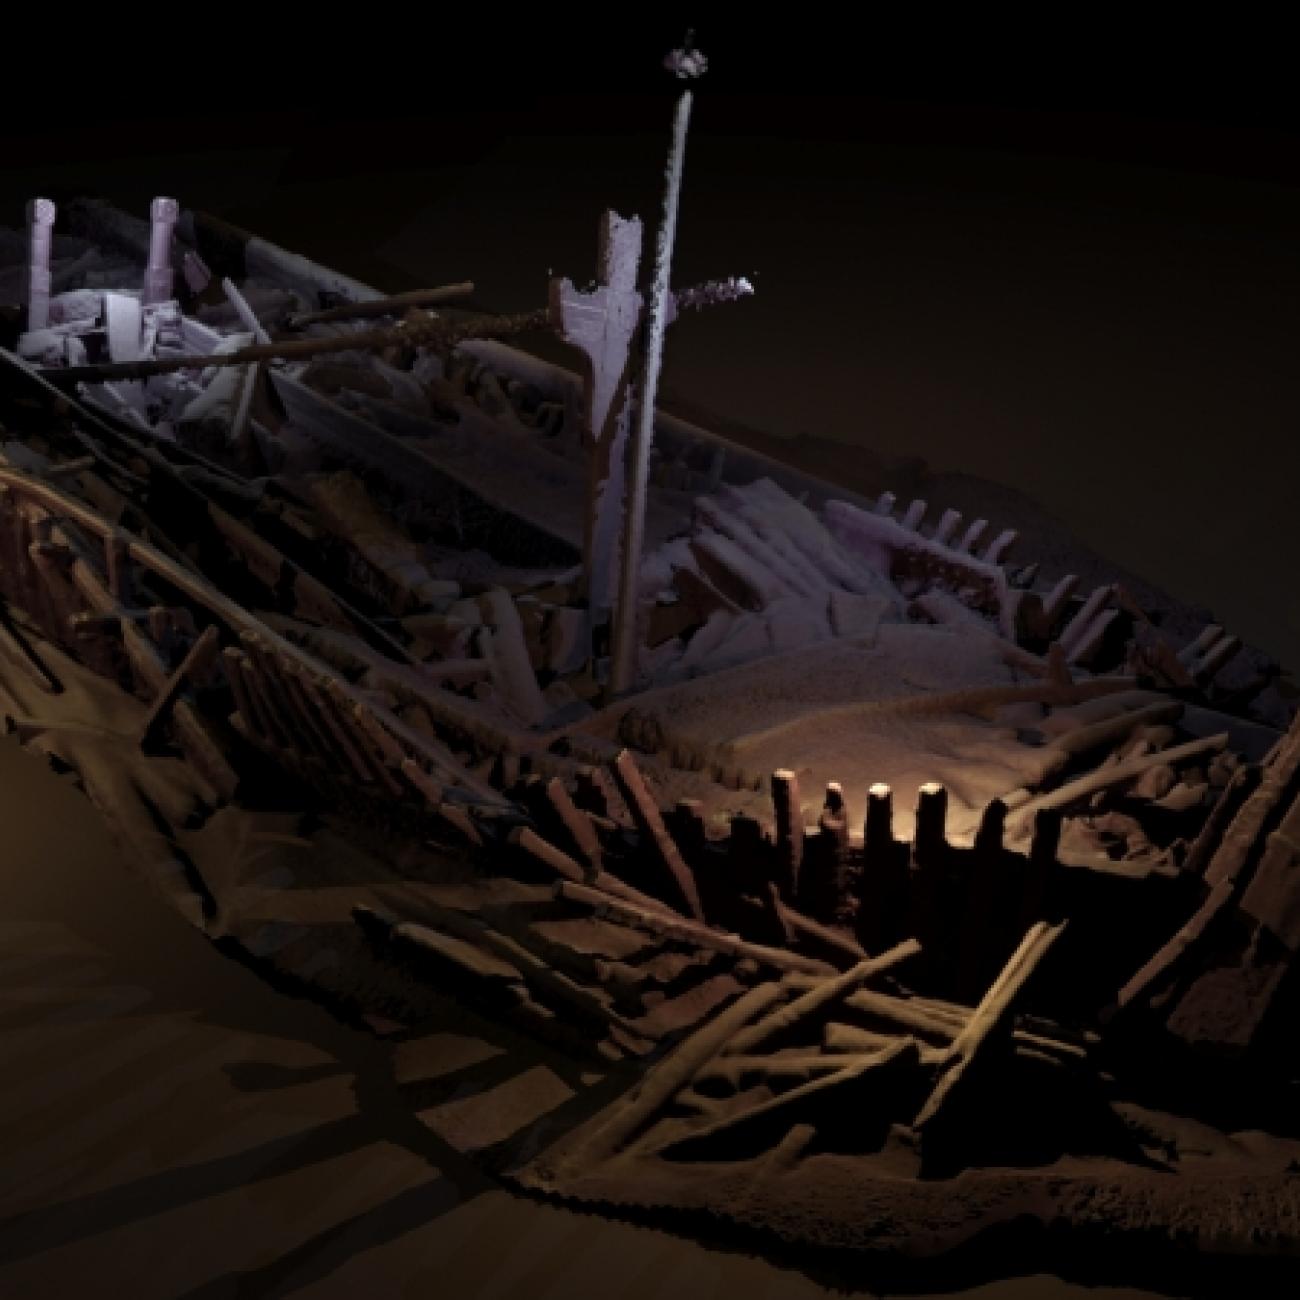 Ottoman period shipwreck presenting unique preservation in wood carvings